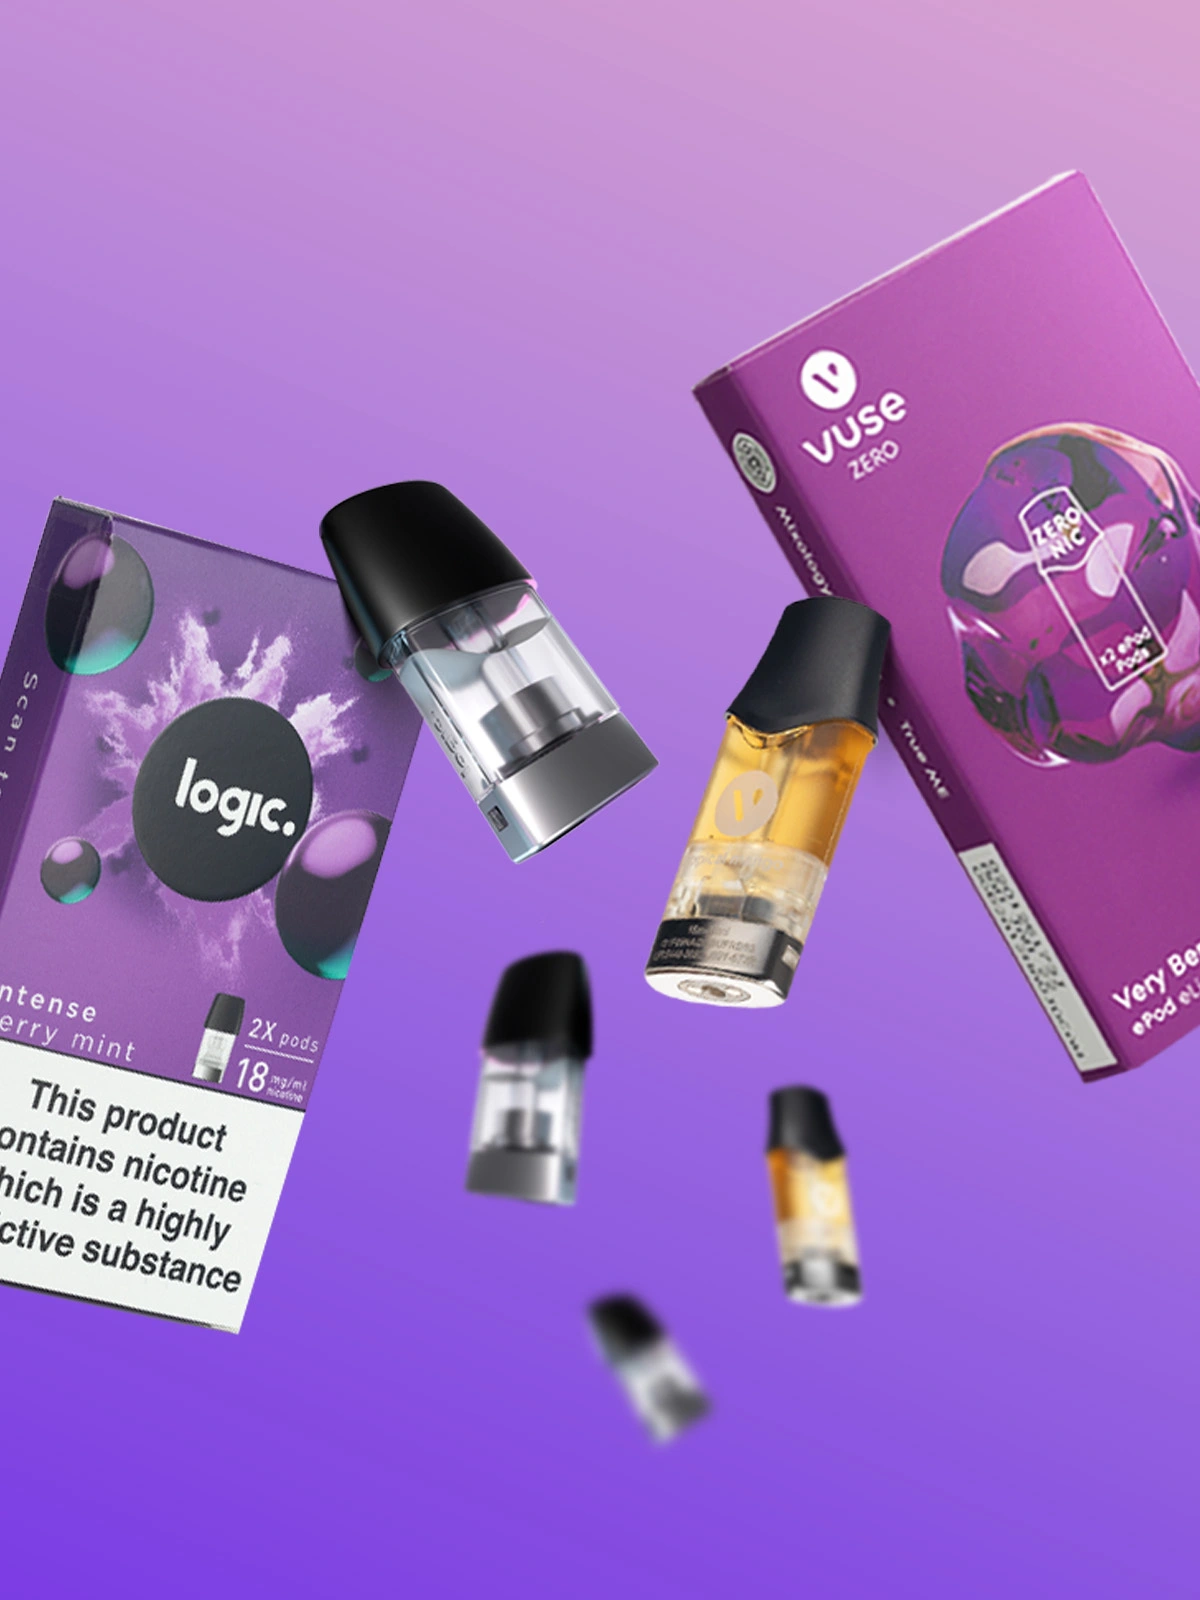 refill pods from various brands including VUSE and Logic, floating in front of a purple background